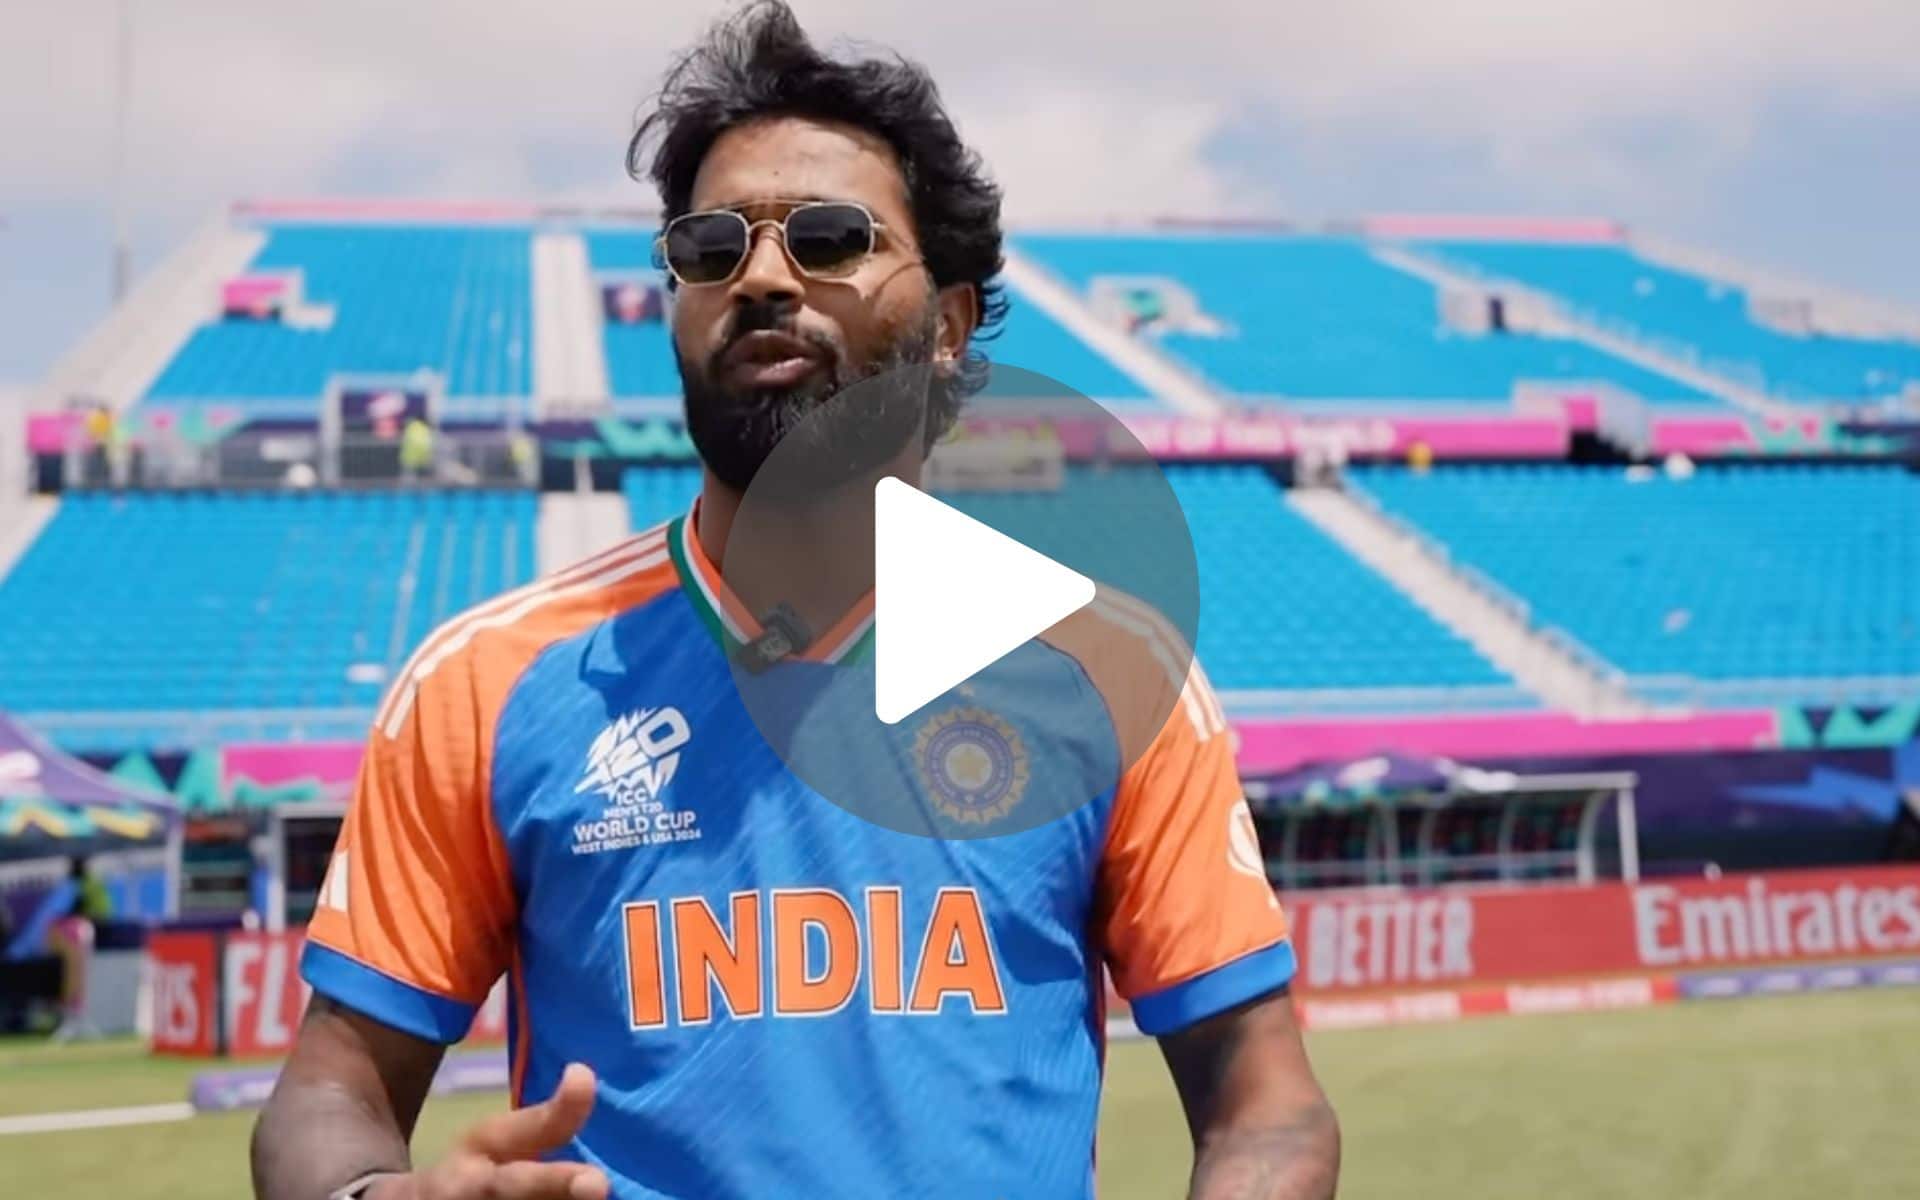 [Watch] 'Someone Like Him Who...': What Did Hardik Pandya Have To Say For Bumrah?